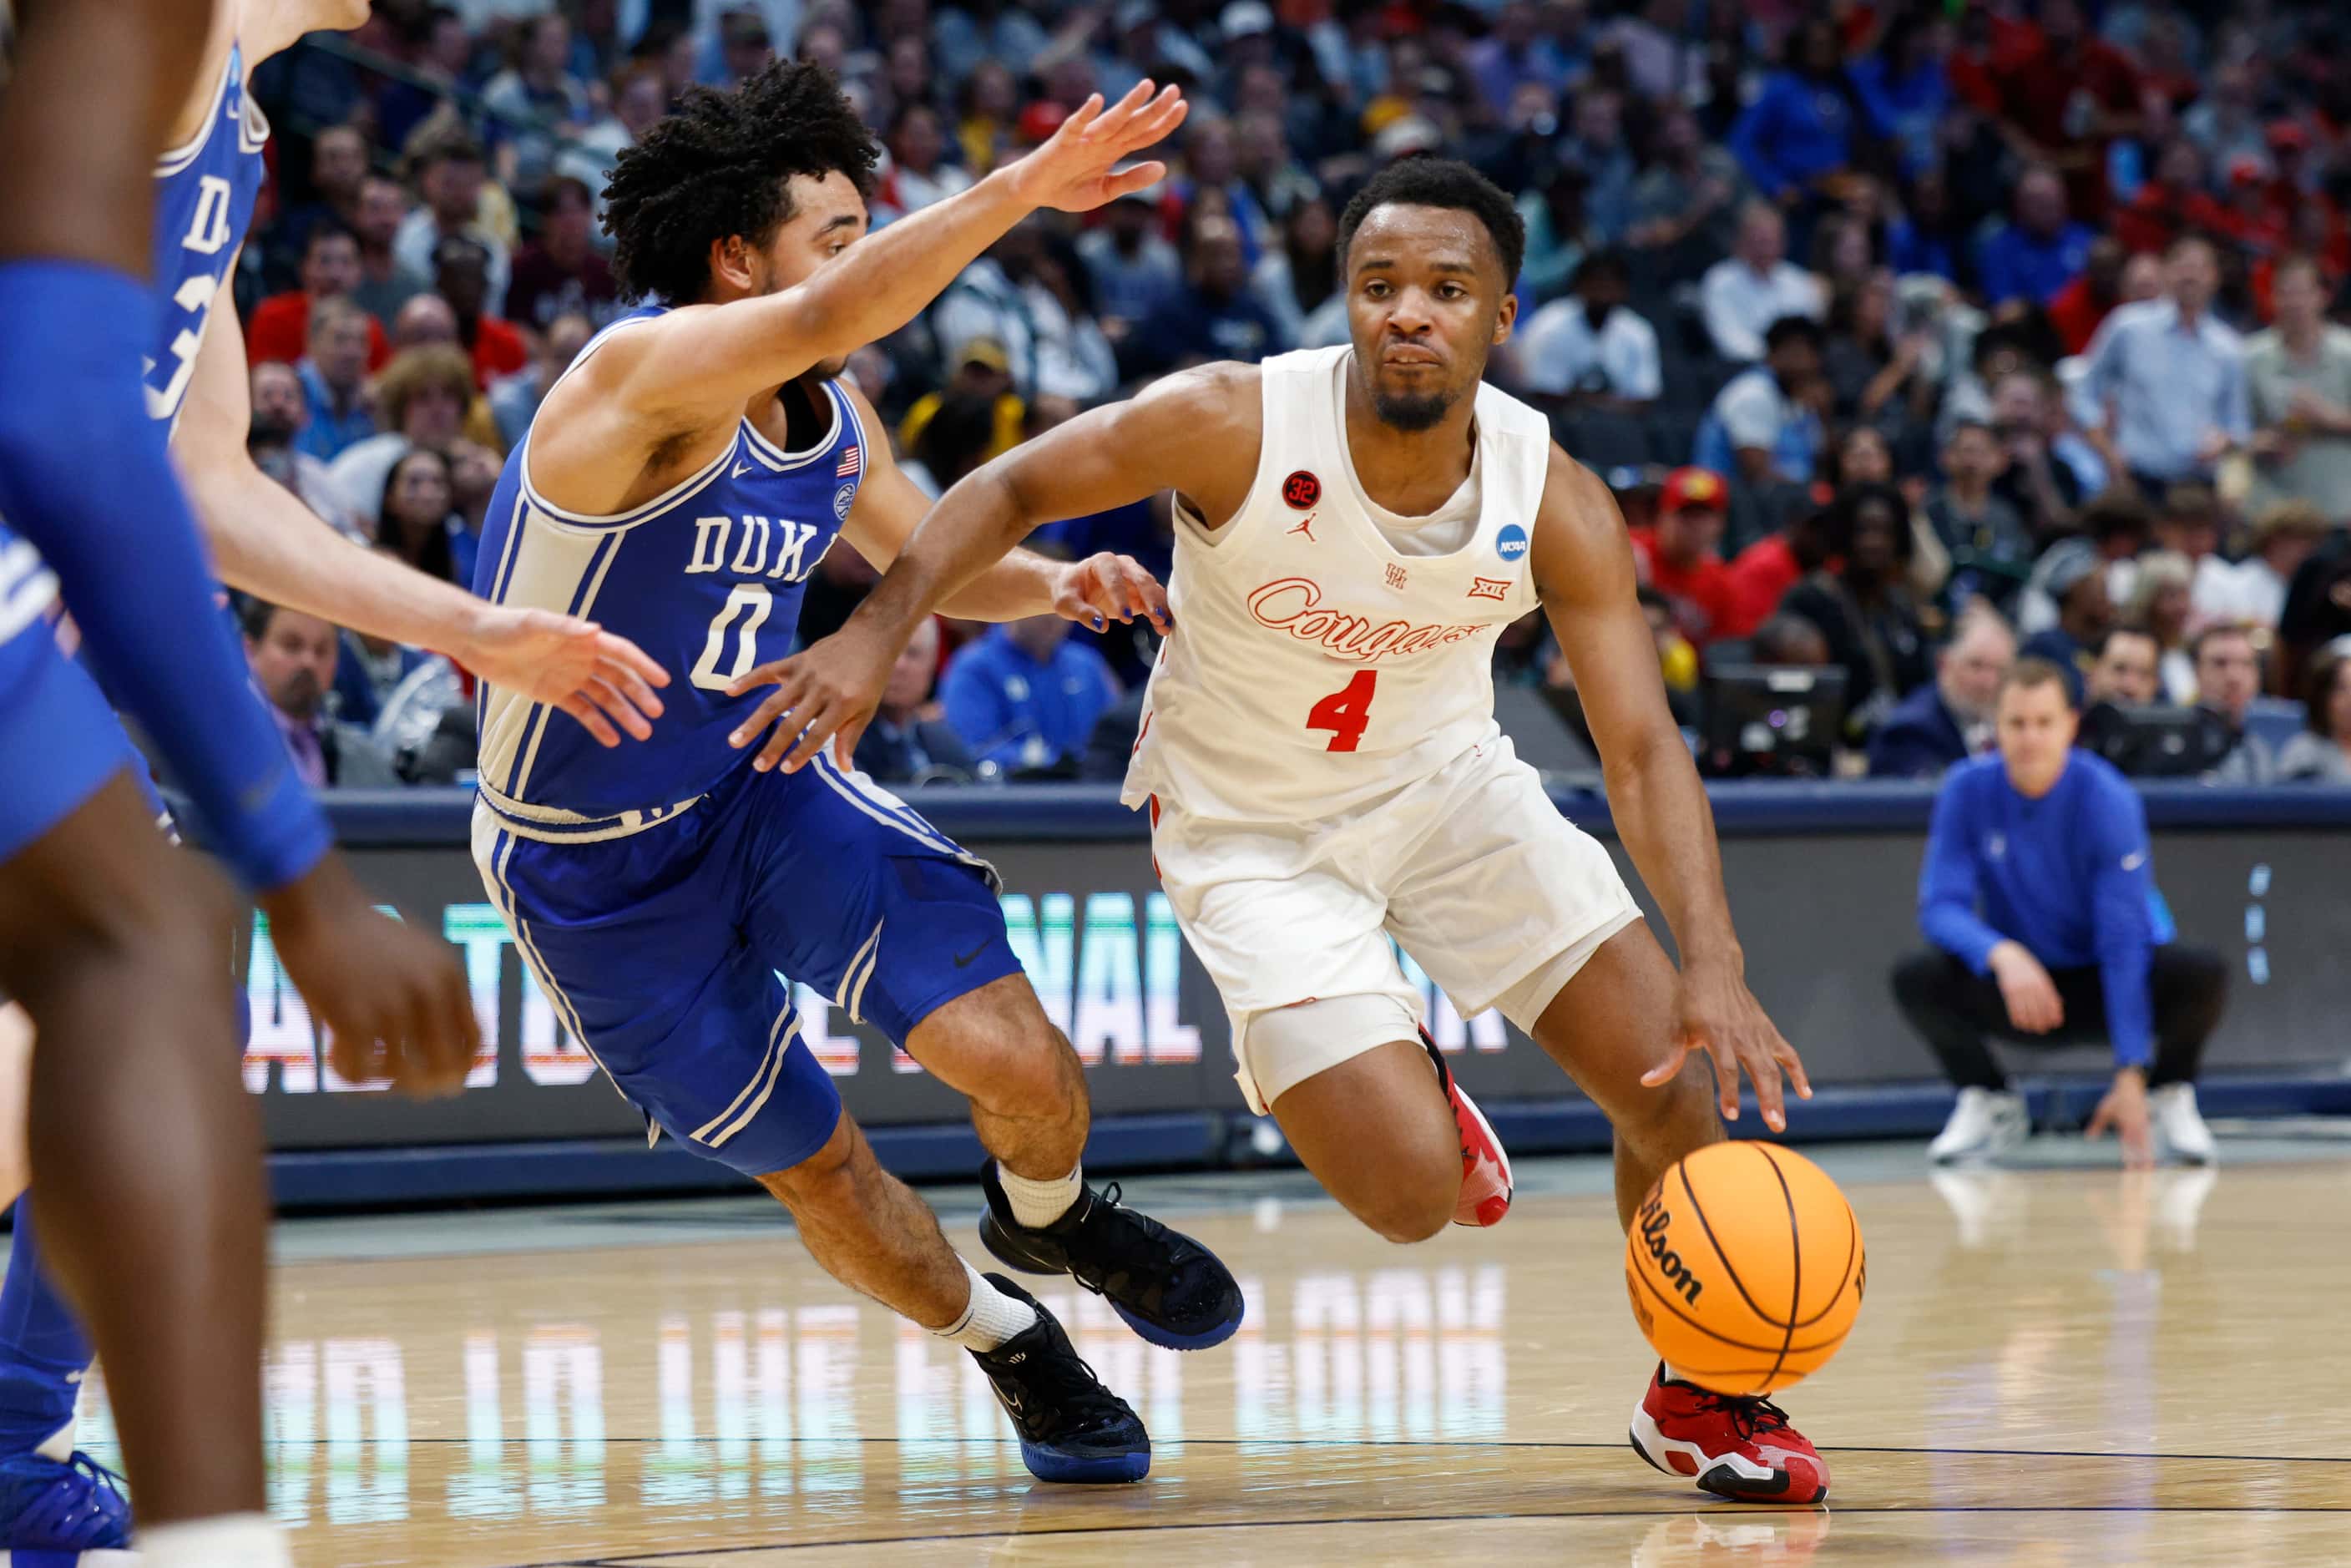 Duke guard Jared McCain (0) defends against Houston guard L.J. Cryer (4) during the second...